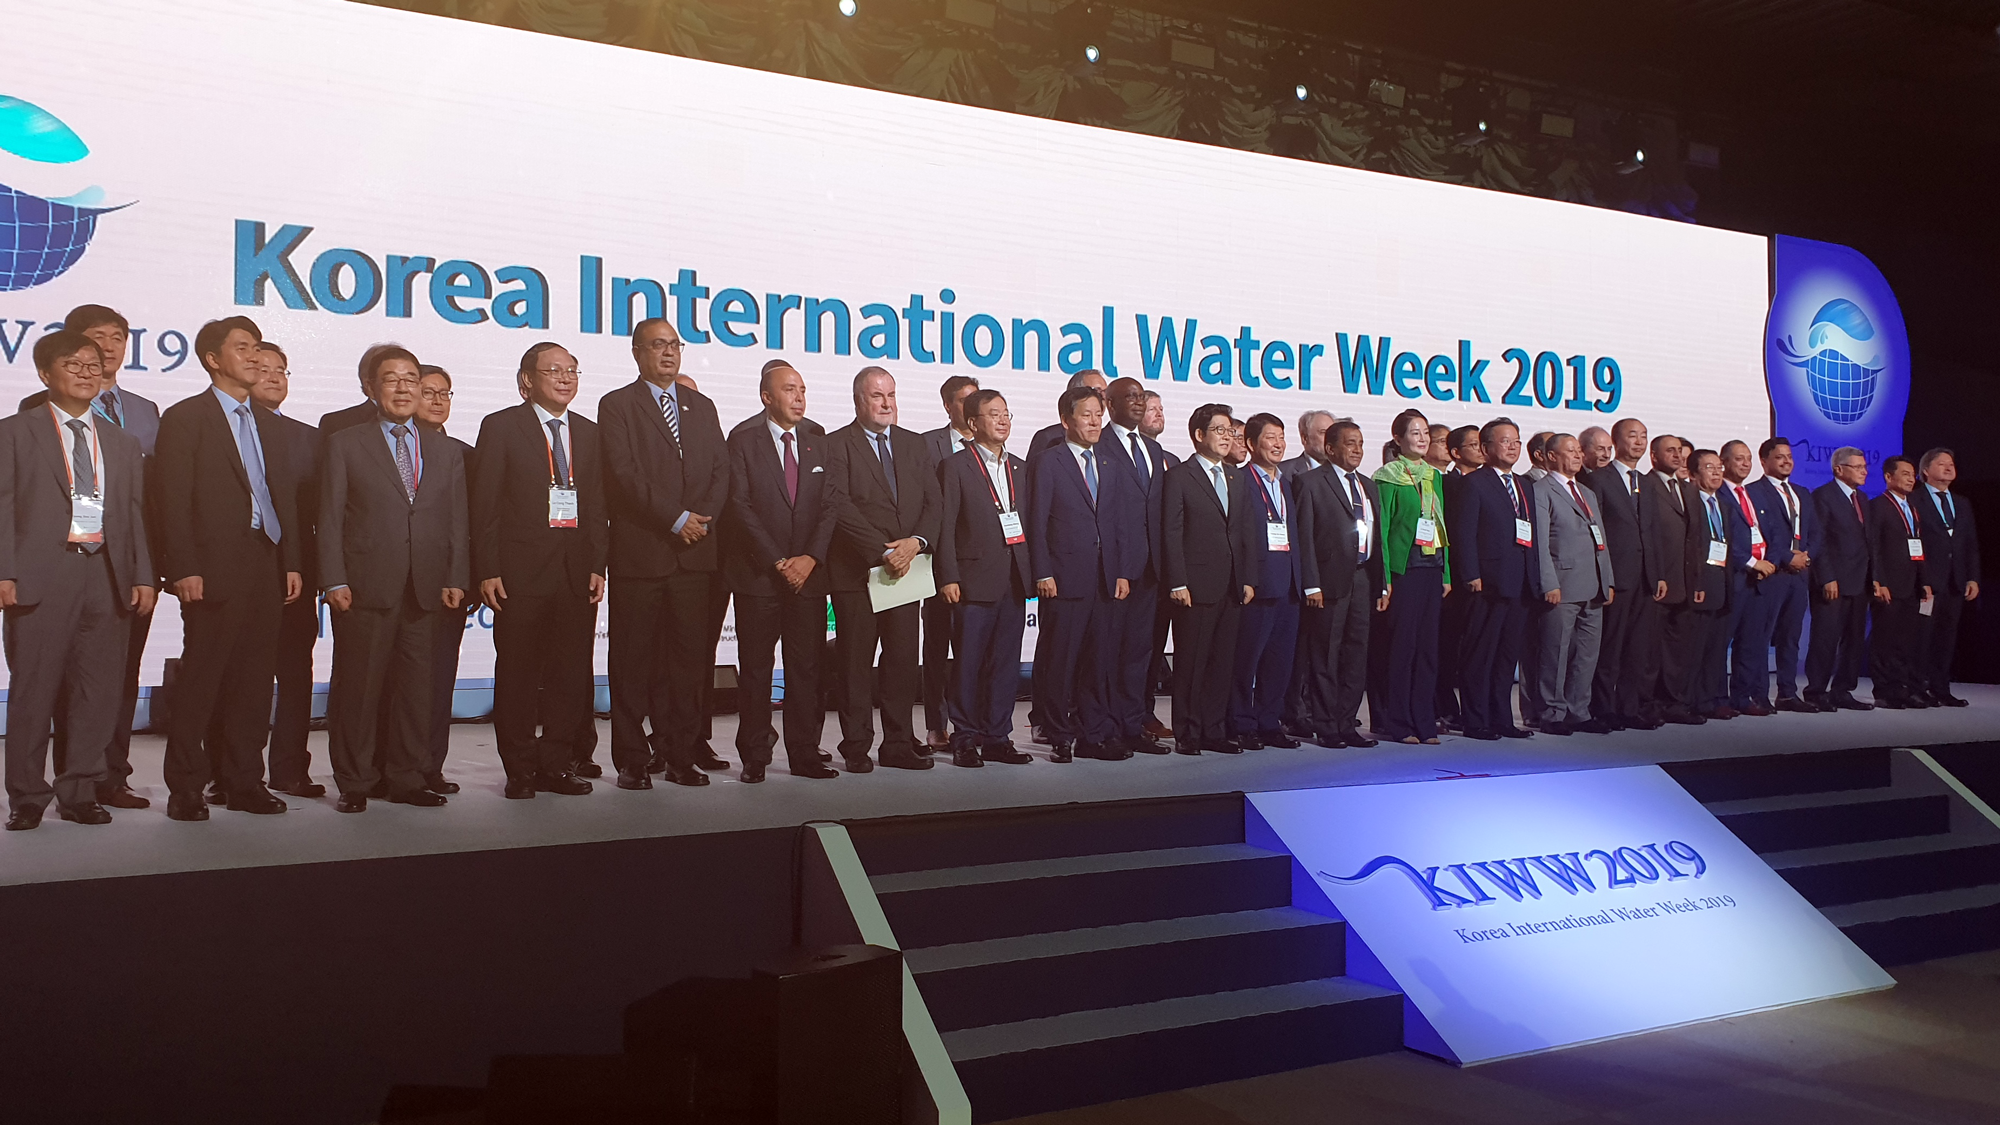 Korea International Water Week opens with a strong political presence from the Minister of Environment of Korea, as well as Ministers from Senegal, Algeria and Sri Lanka, the Mayor of Daegu, the Deputy Speaker of the National Assembly and other esteemed participants, 4 September 2019